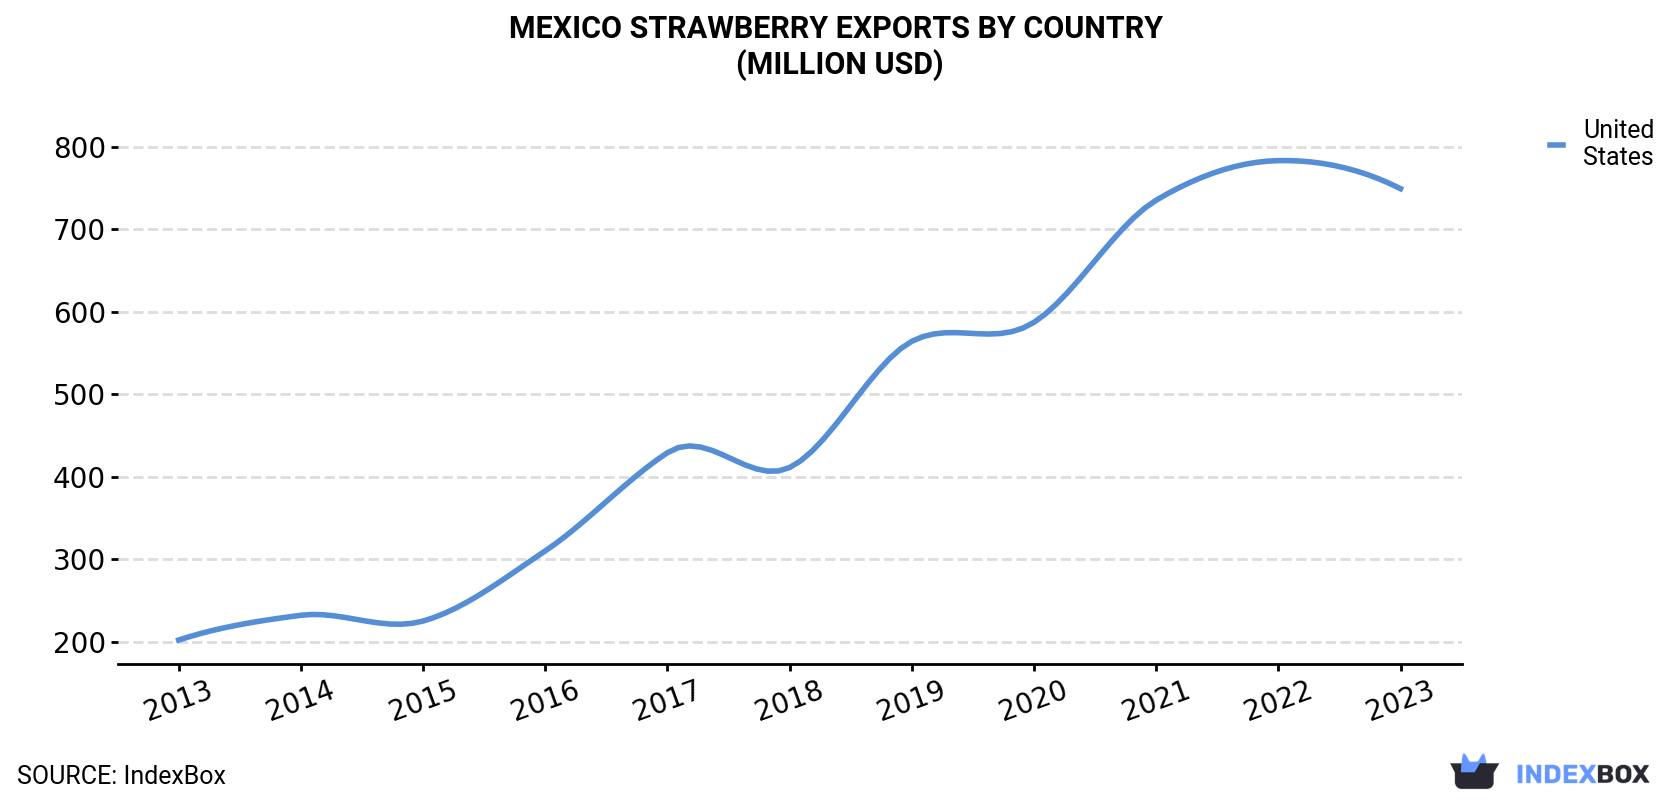 Mexico Strawberry Exports By Country (Million USD)